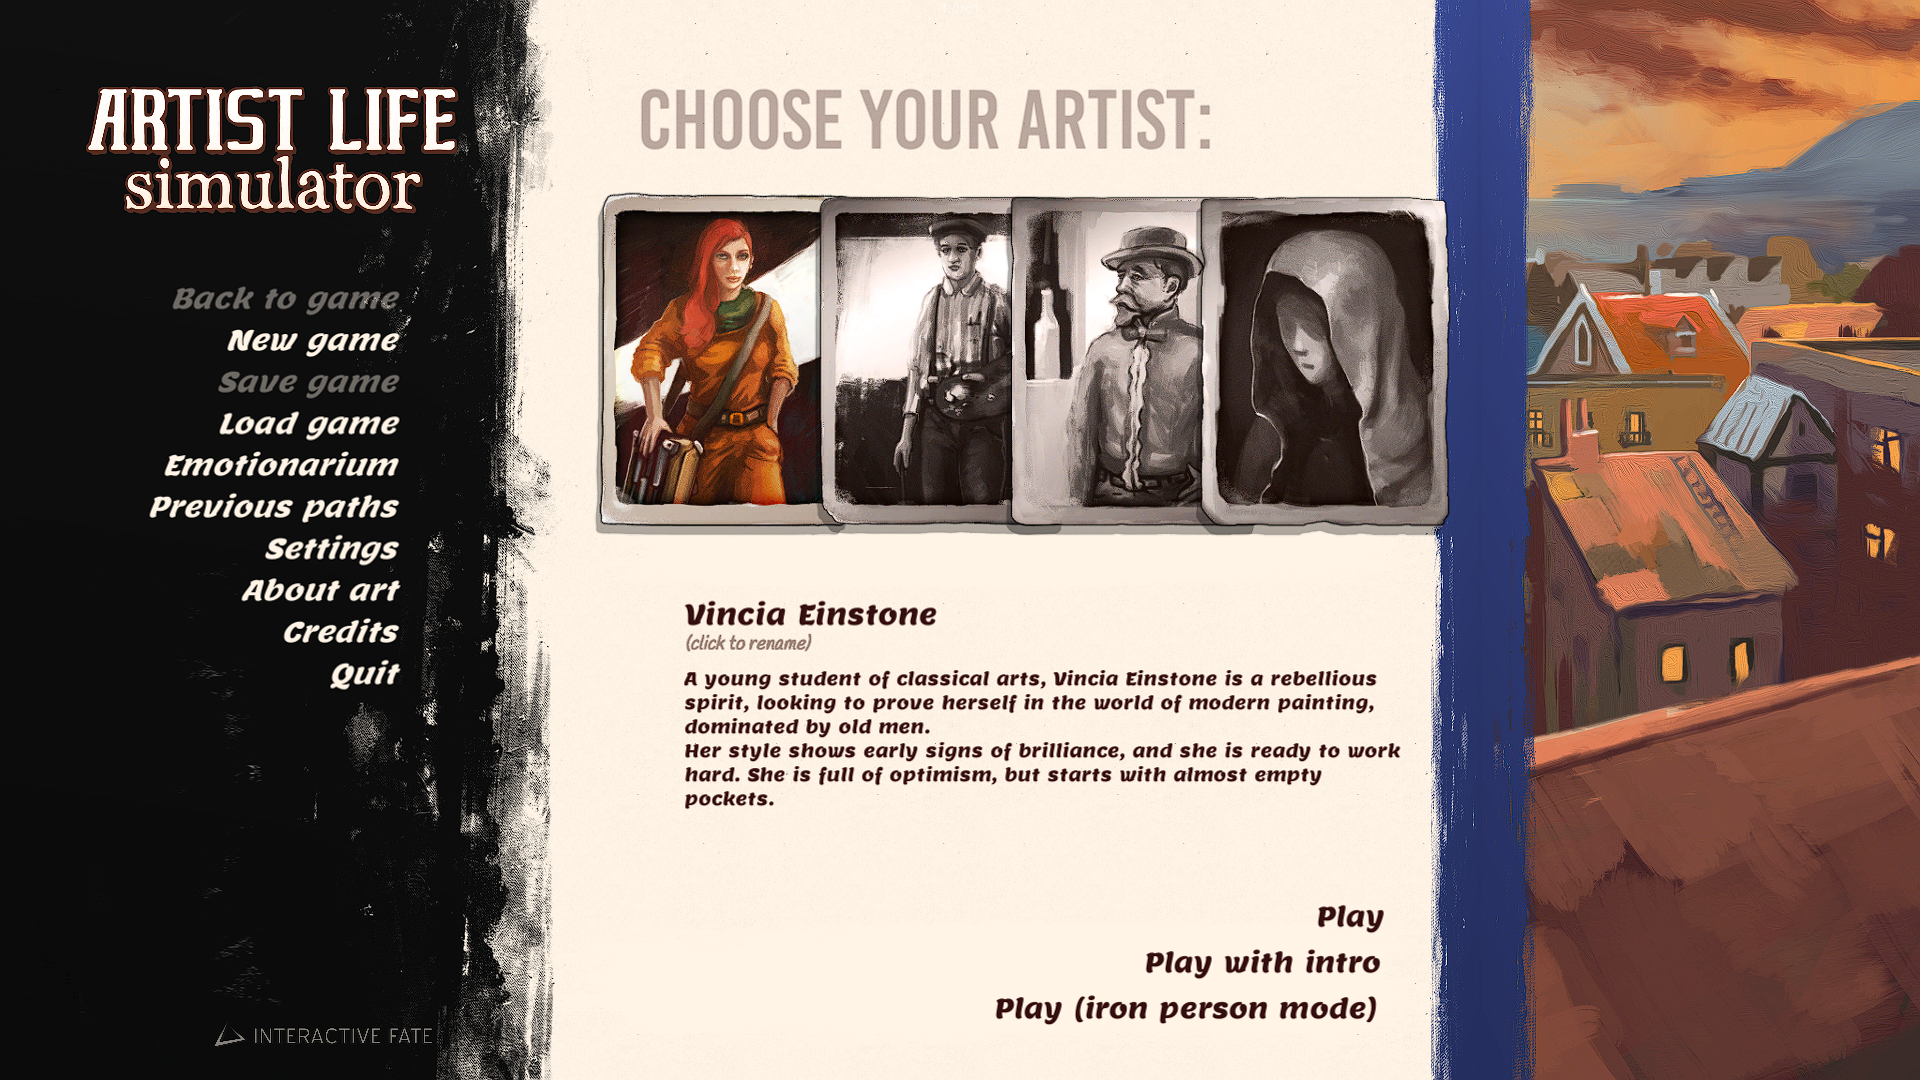 The title and character select screen from Artist Life Simulator